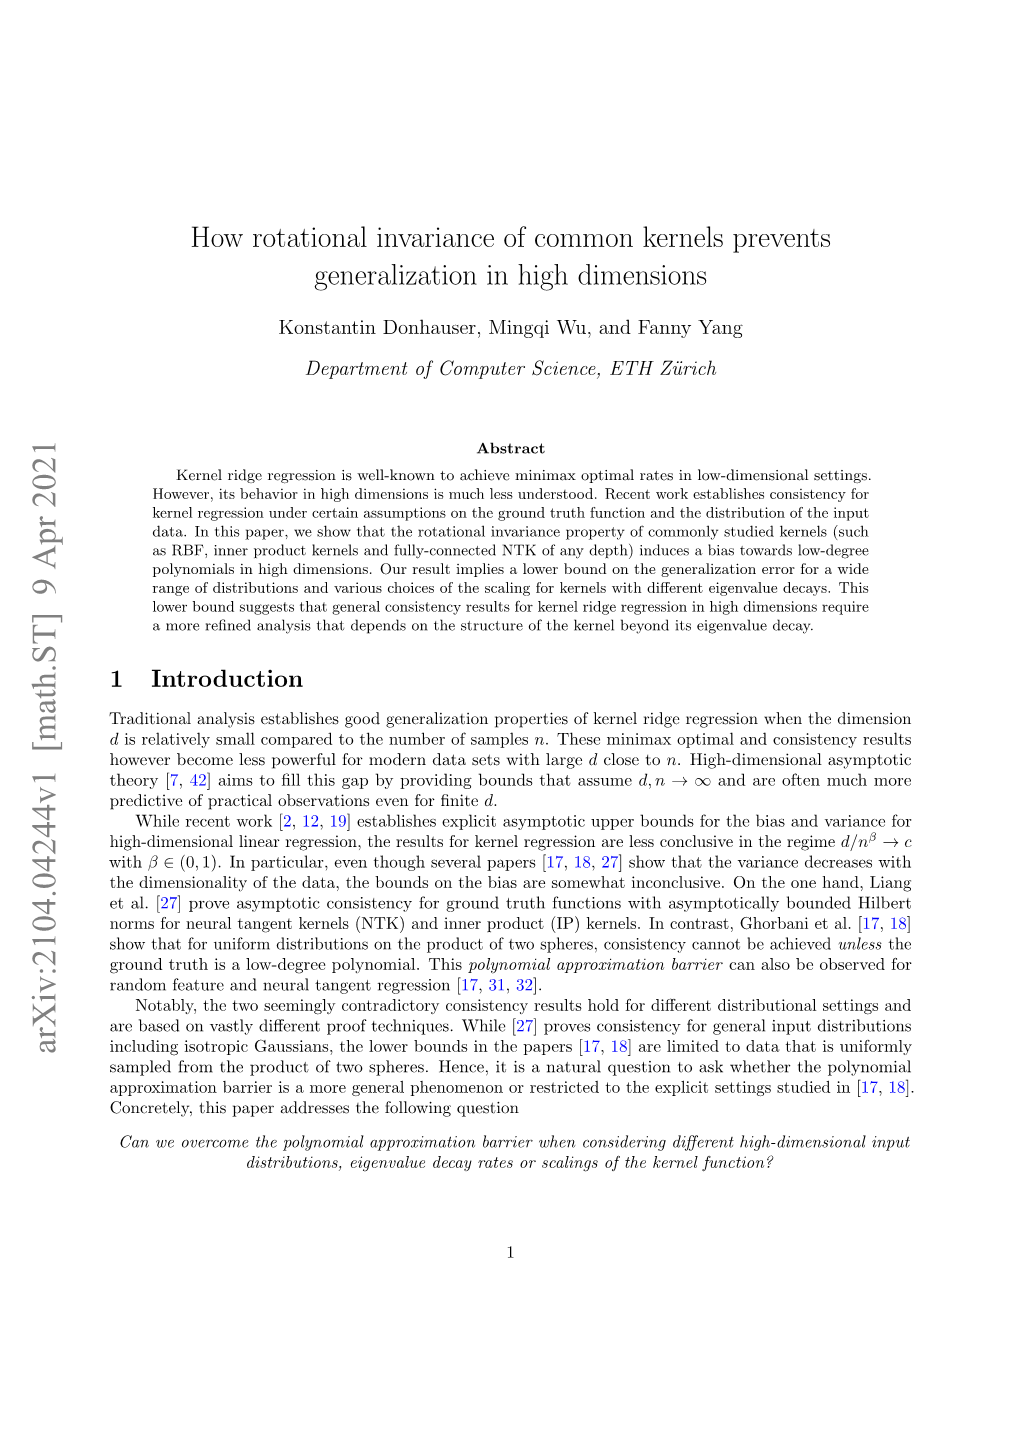 How Rotational Invariance of Common Kernels Prevents Generalization in High Dimensions